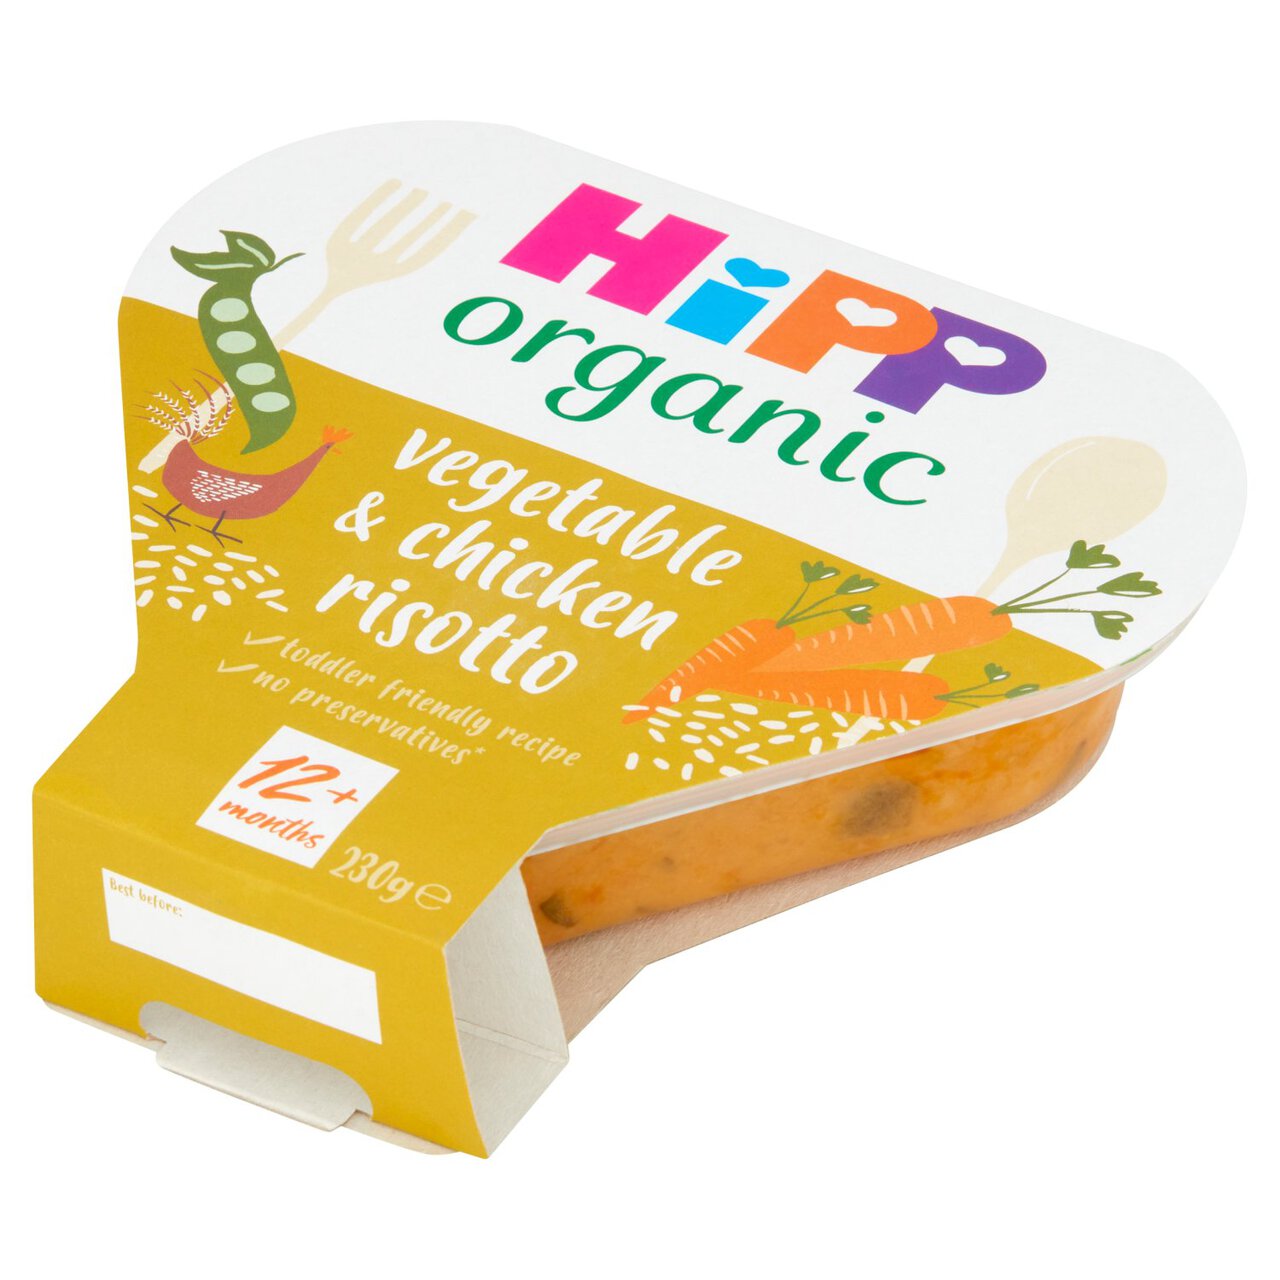 HiPP Organic Vegetable & Chicken Risotto Toddler Tray Meal 1-3 Years 230g